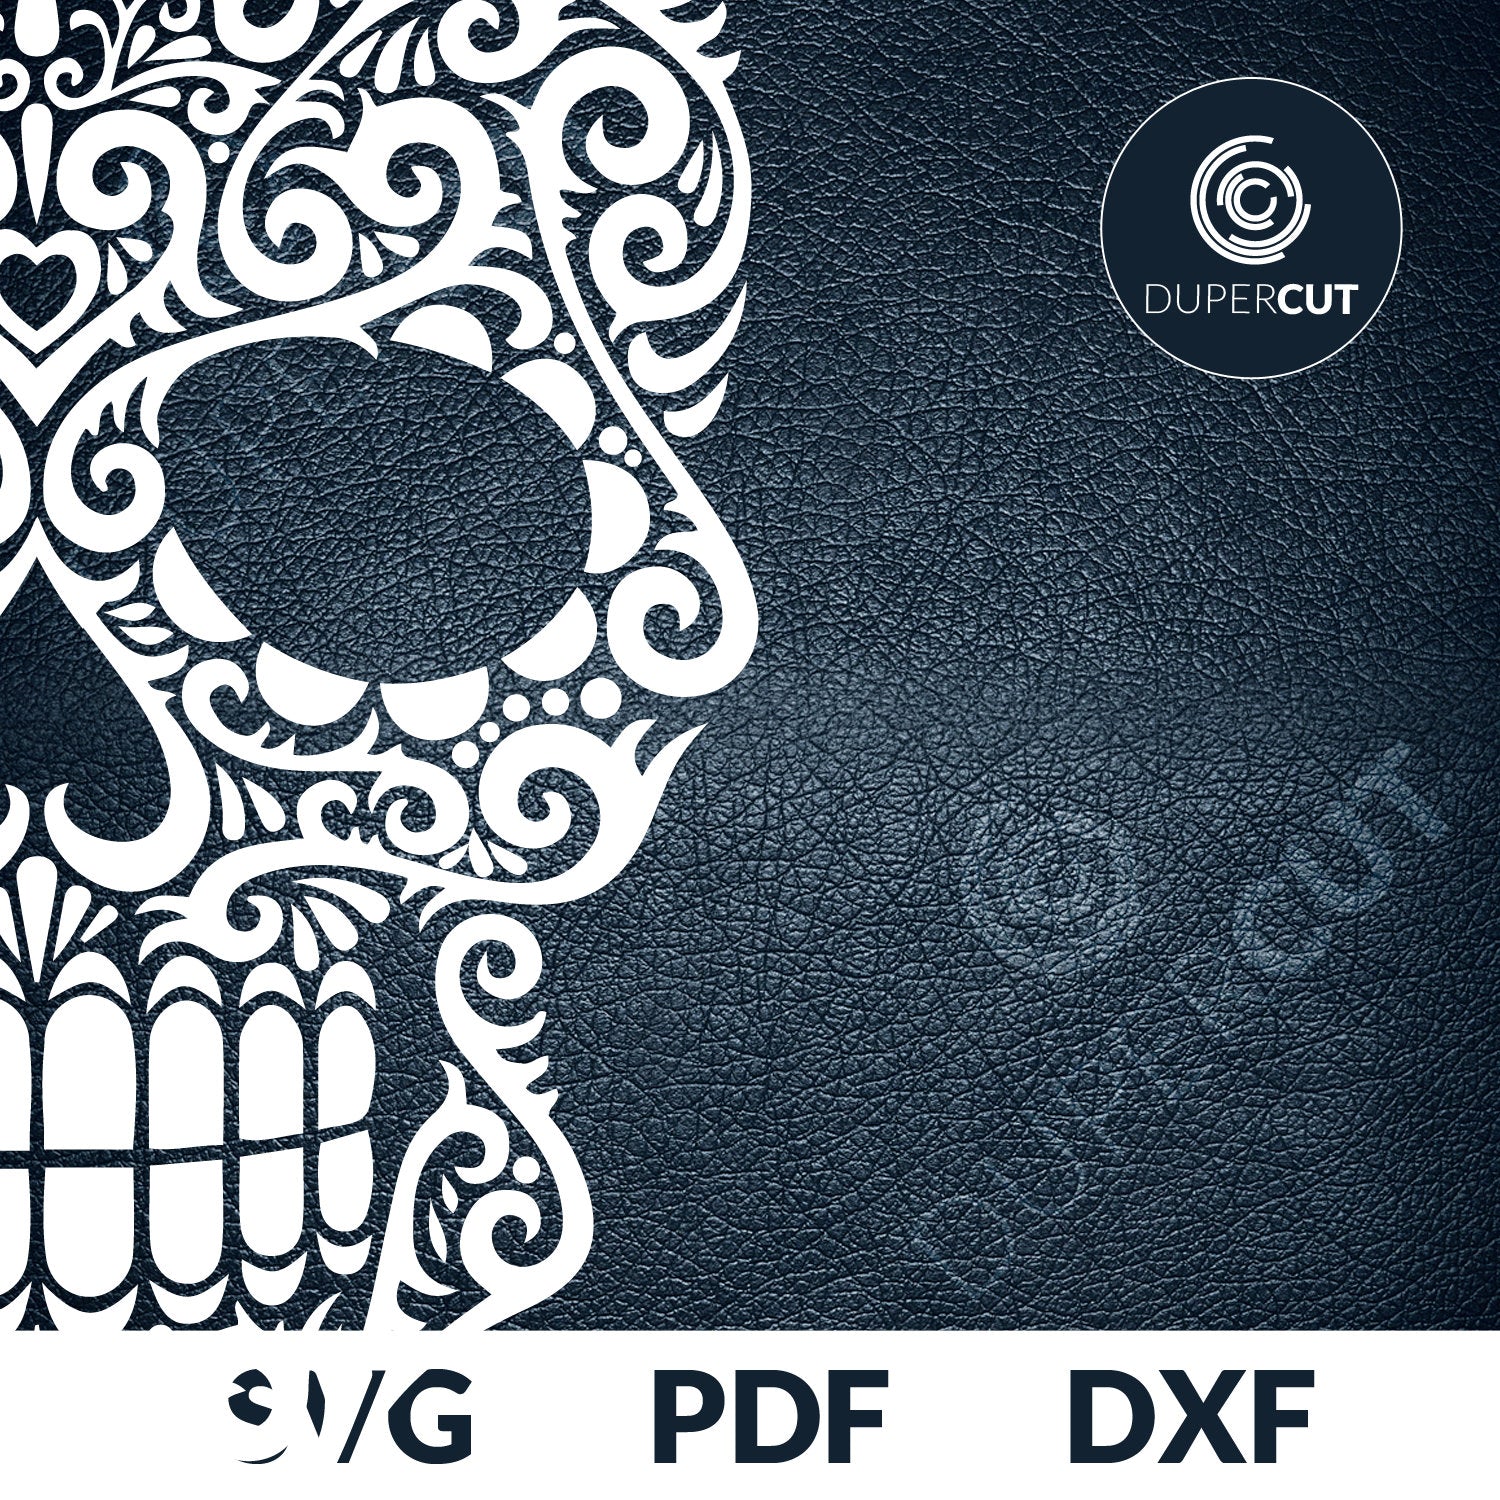 Detailed skull swirls. SVG PNG DXF cutting files for Cricut, Silhouette, Glowforge, print on demand, sublimation templates